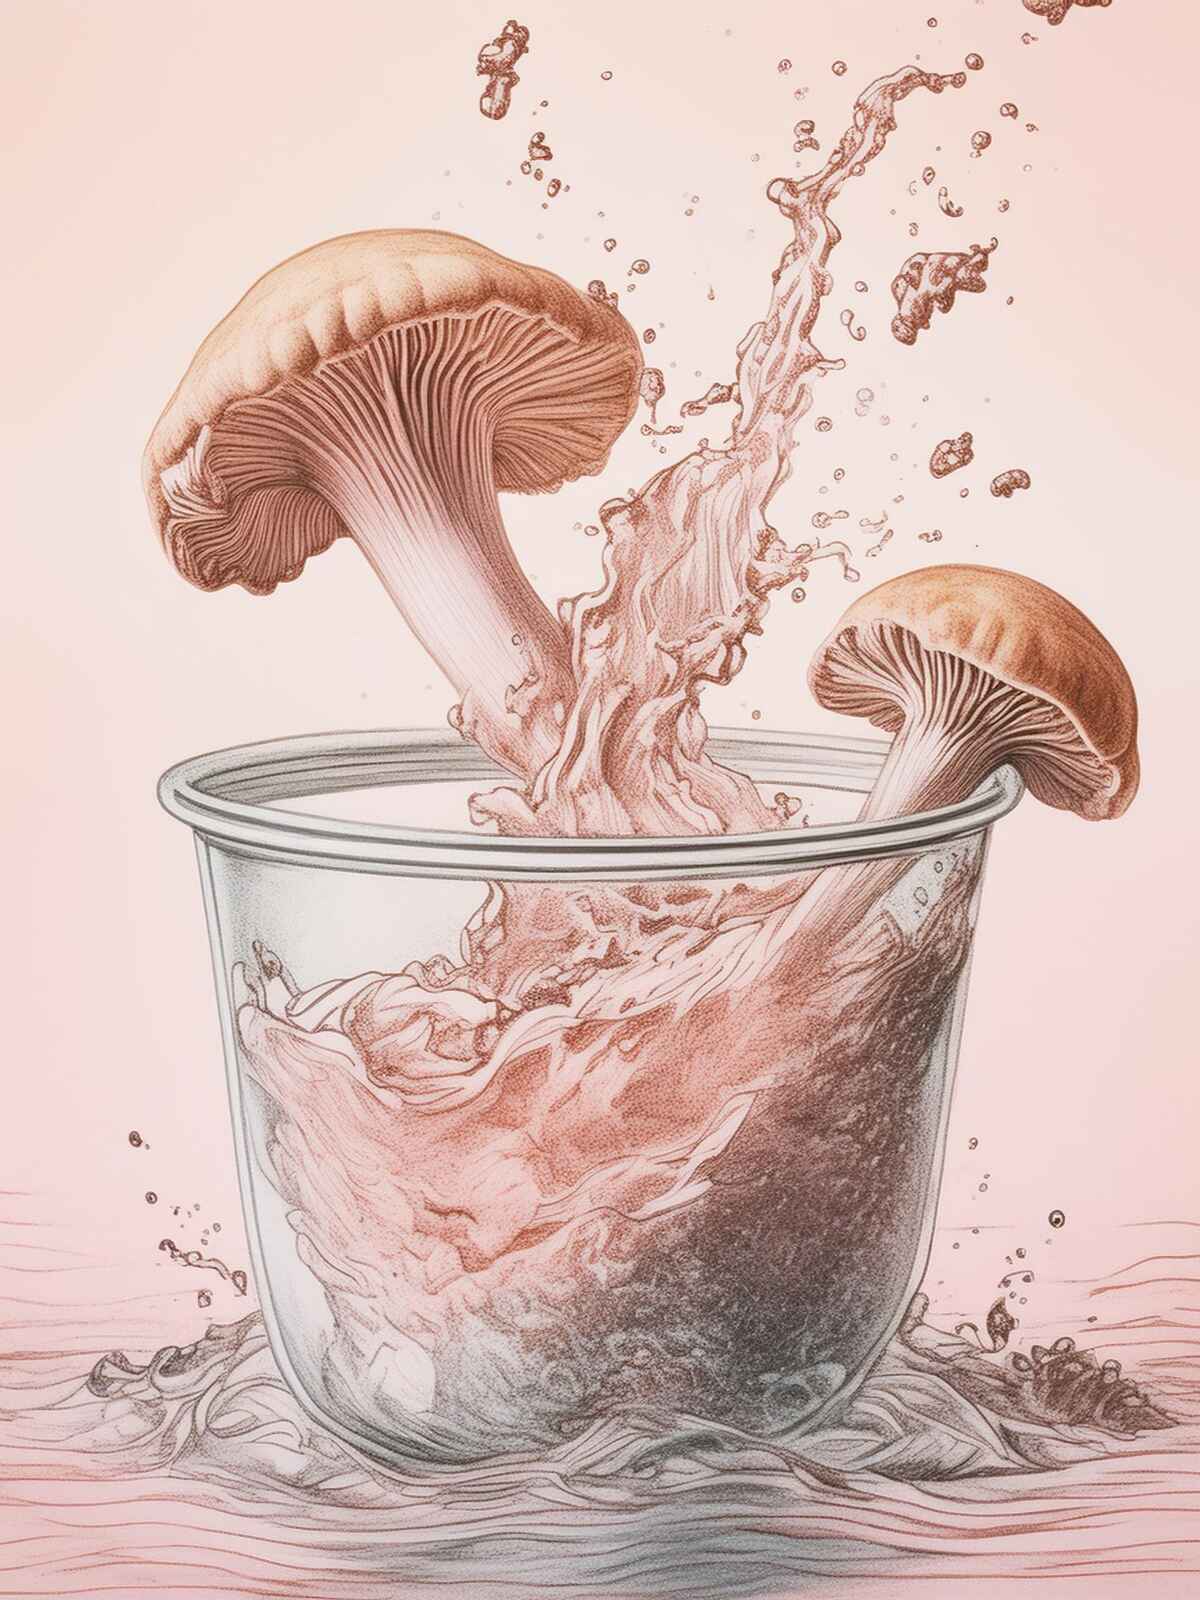 Drawing of mushroom powder being mixed into a container of water, depicting the water extraction process for mushroom extracts.